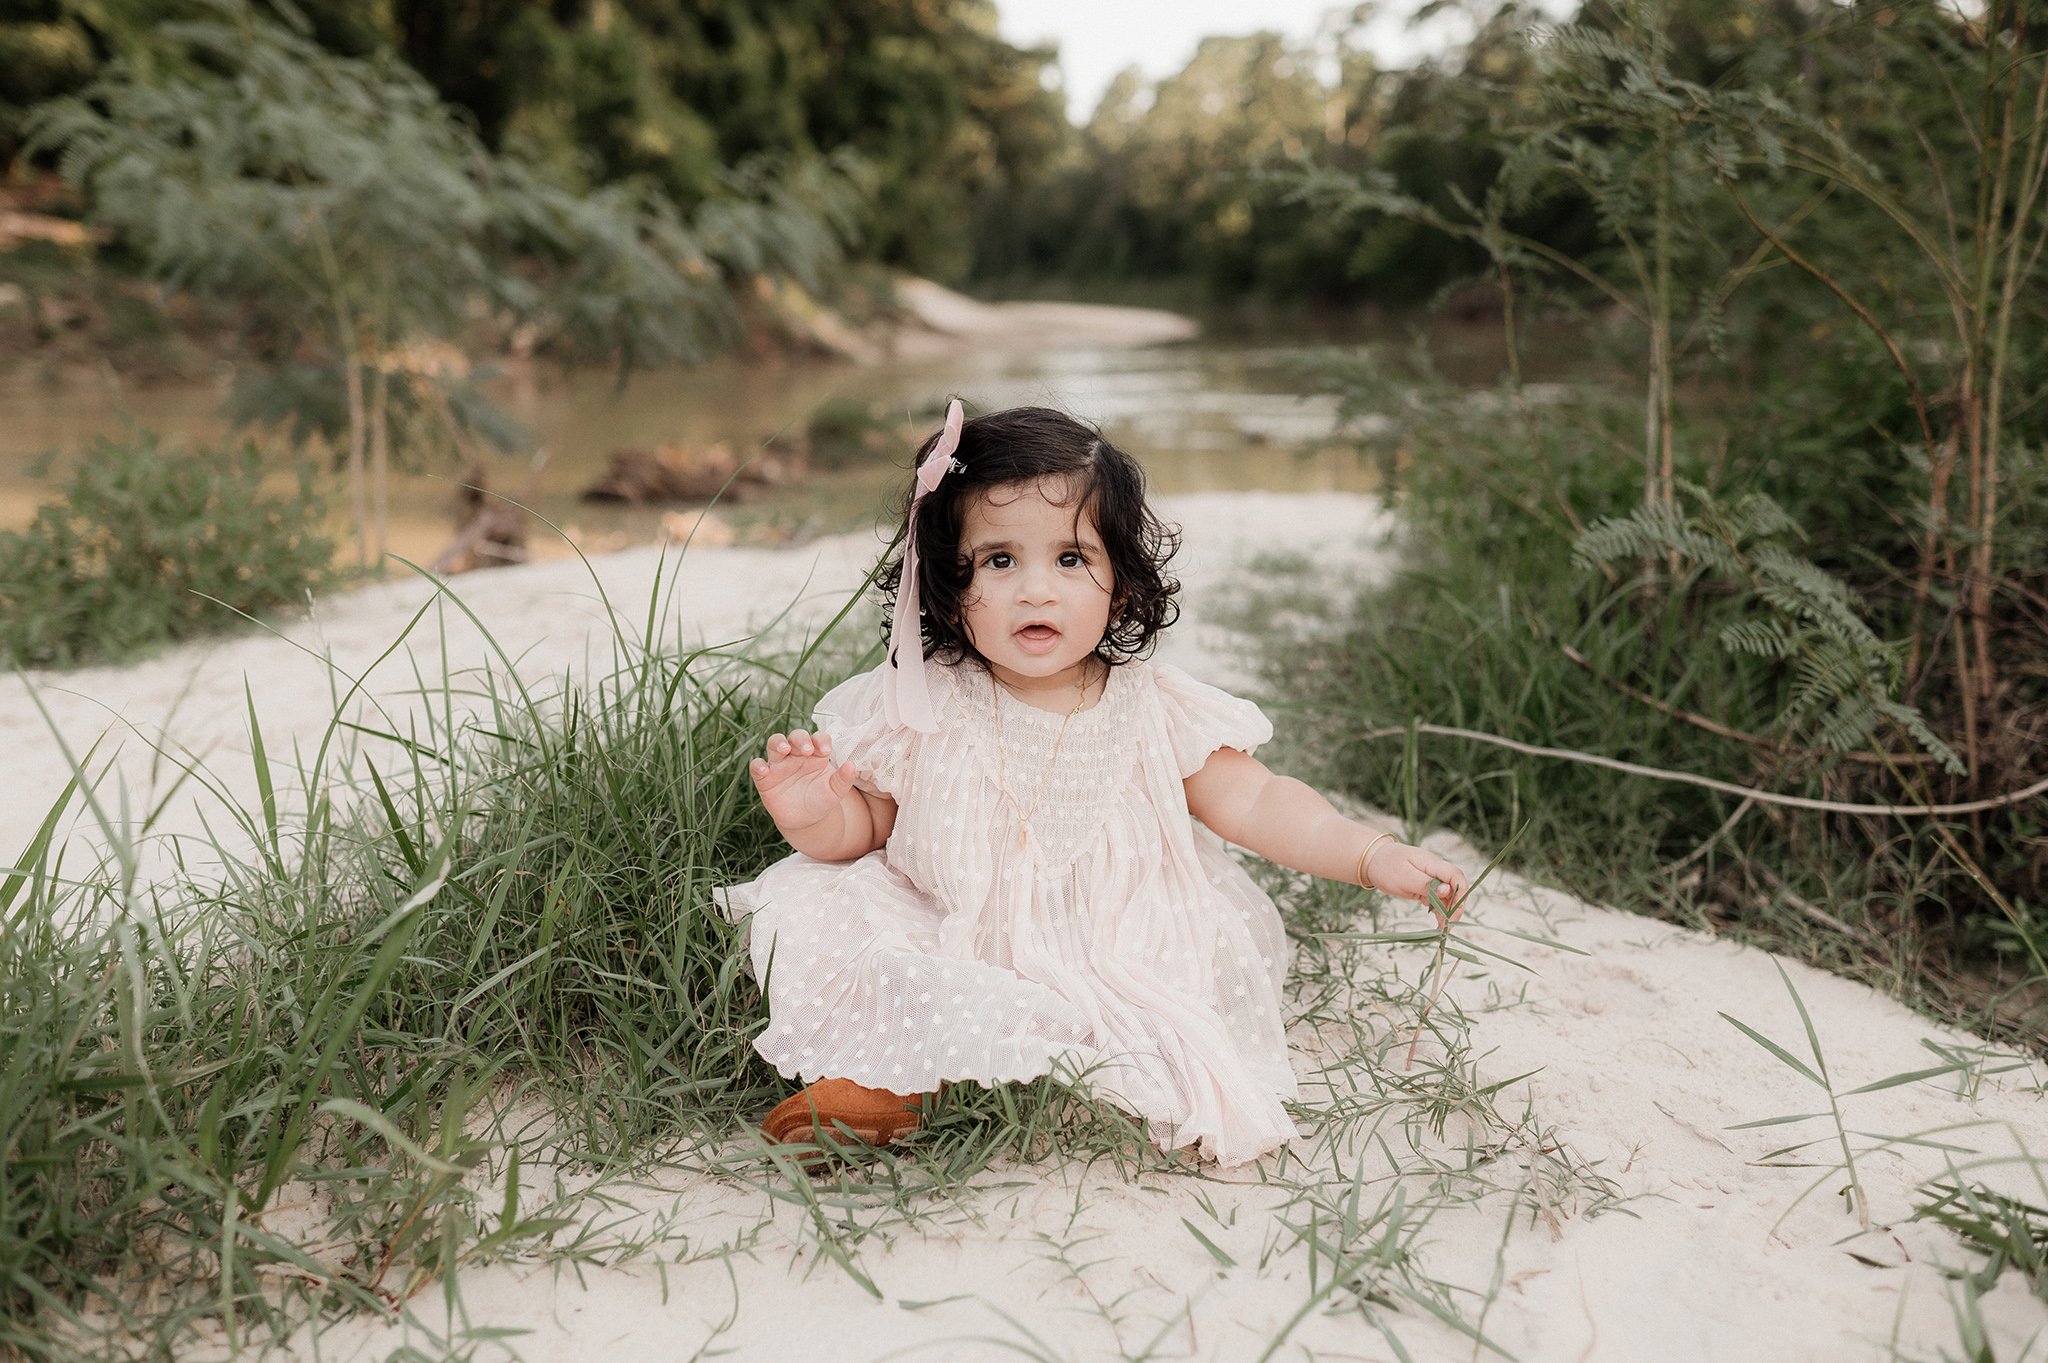 the woodlands family photographer _ conroe photographer _ houston family photographer _ ashley gillen photography _ texas family photographer _ conroe wedding photographer _ conroe texas _ cshi27.jpg